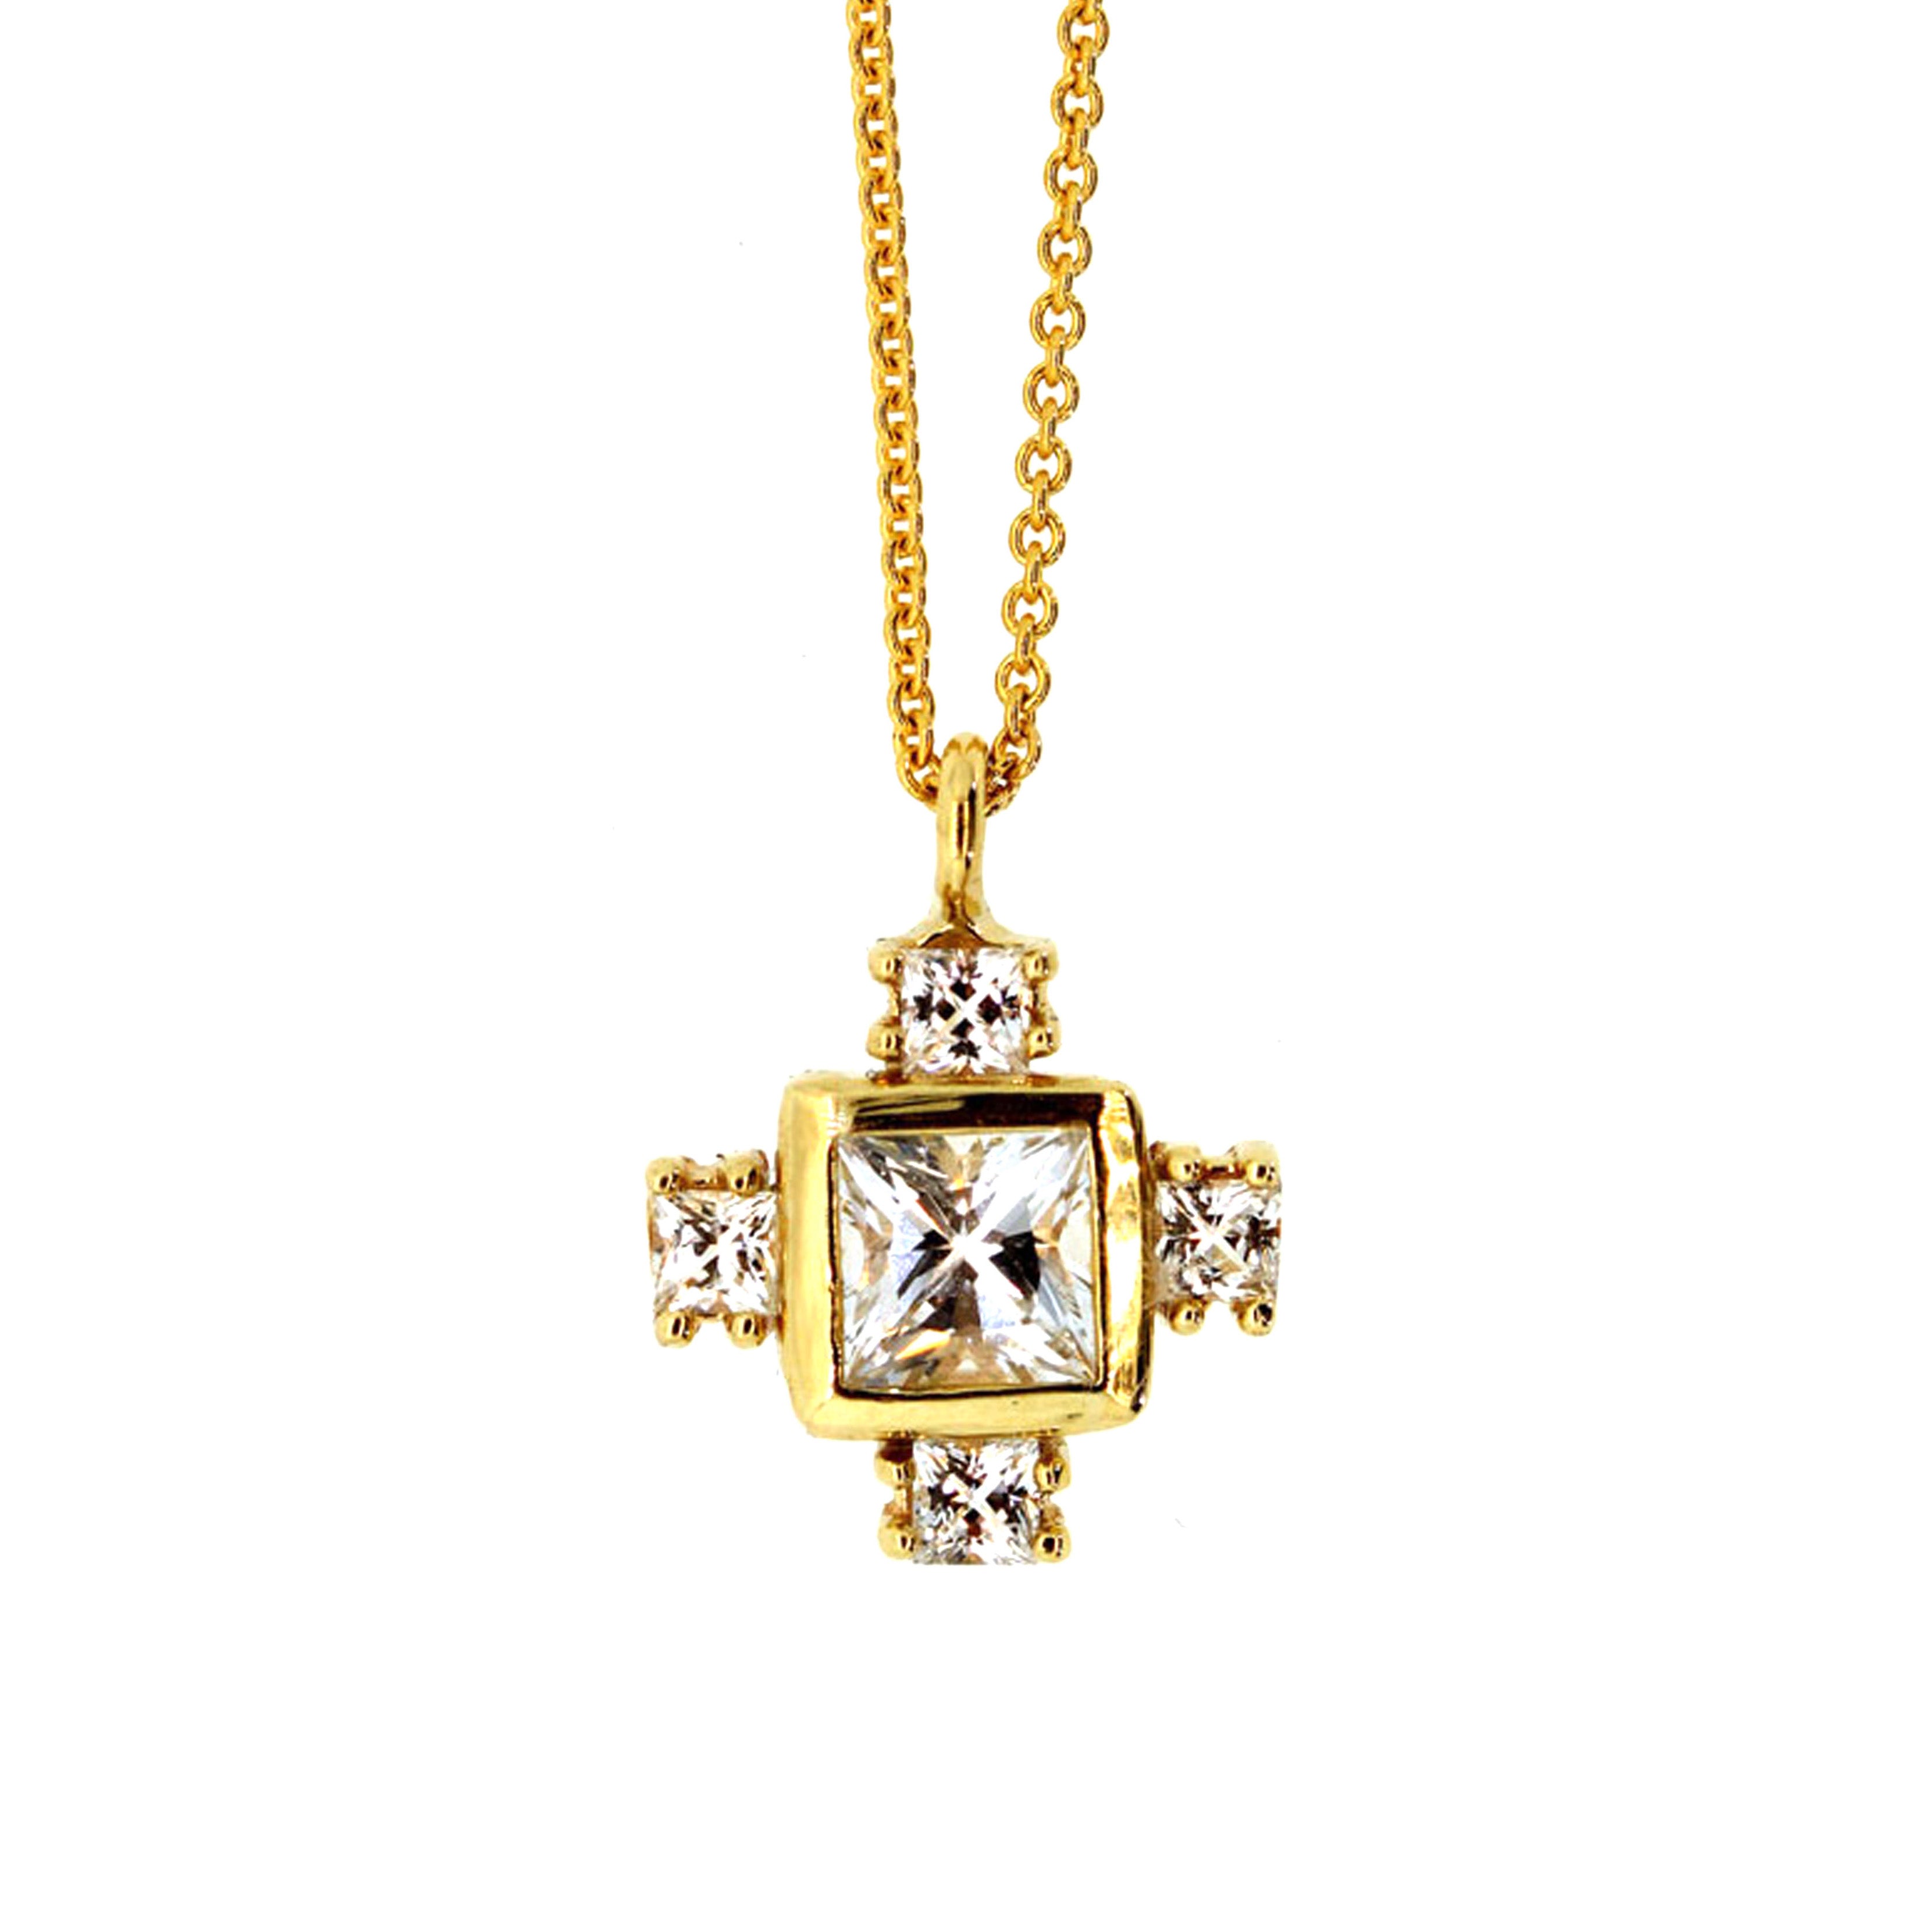 This Byzantine Cross Necklace consists of four small white sapphires prong set soldered around a larger white sapphire bezel set and dangling from a yellow gold chain. Each stone is hand picked and necklace made to order at Rebecca Lankford Designs in Houston, Texas.